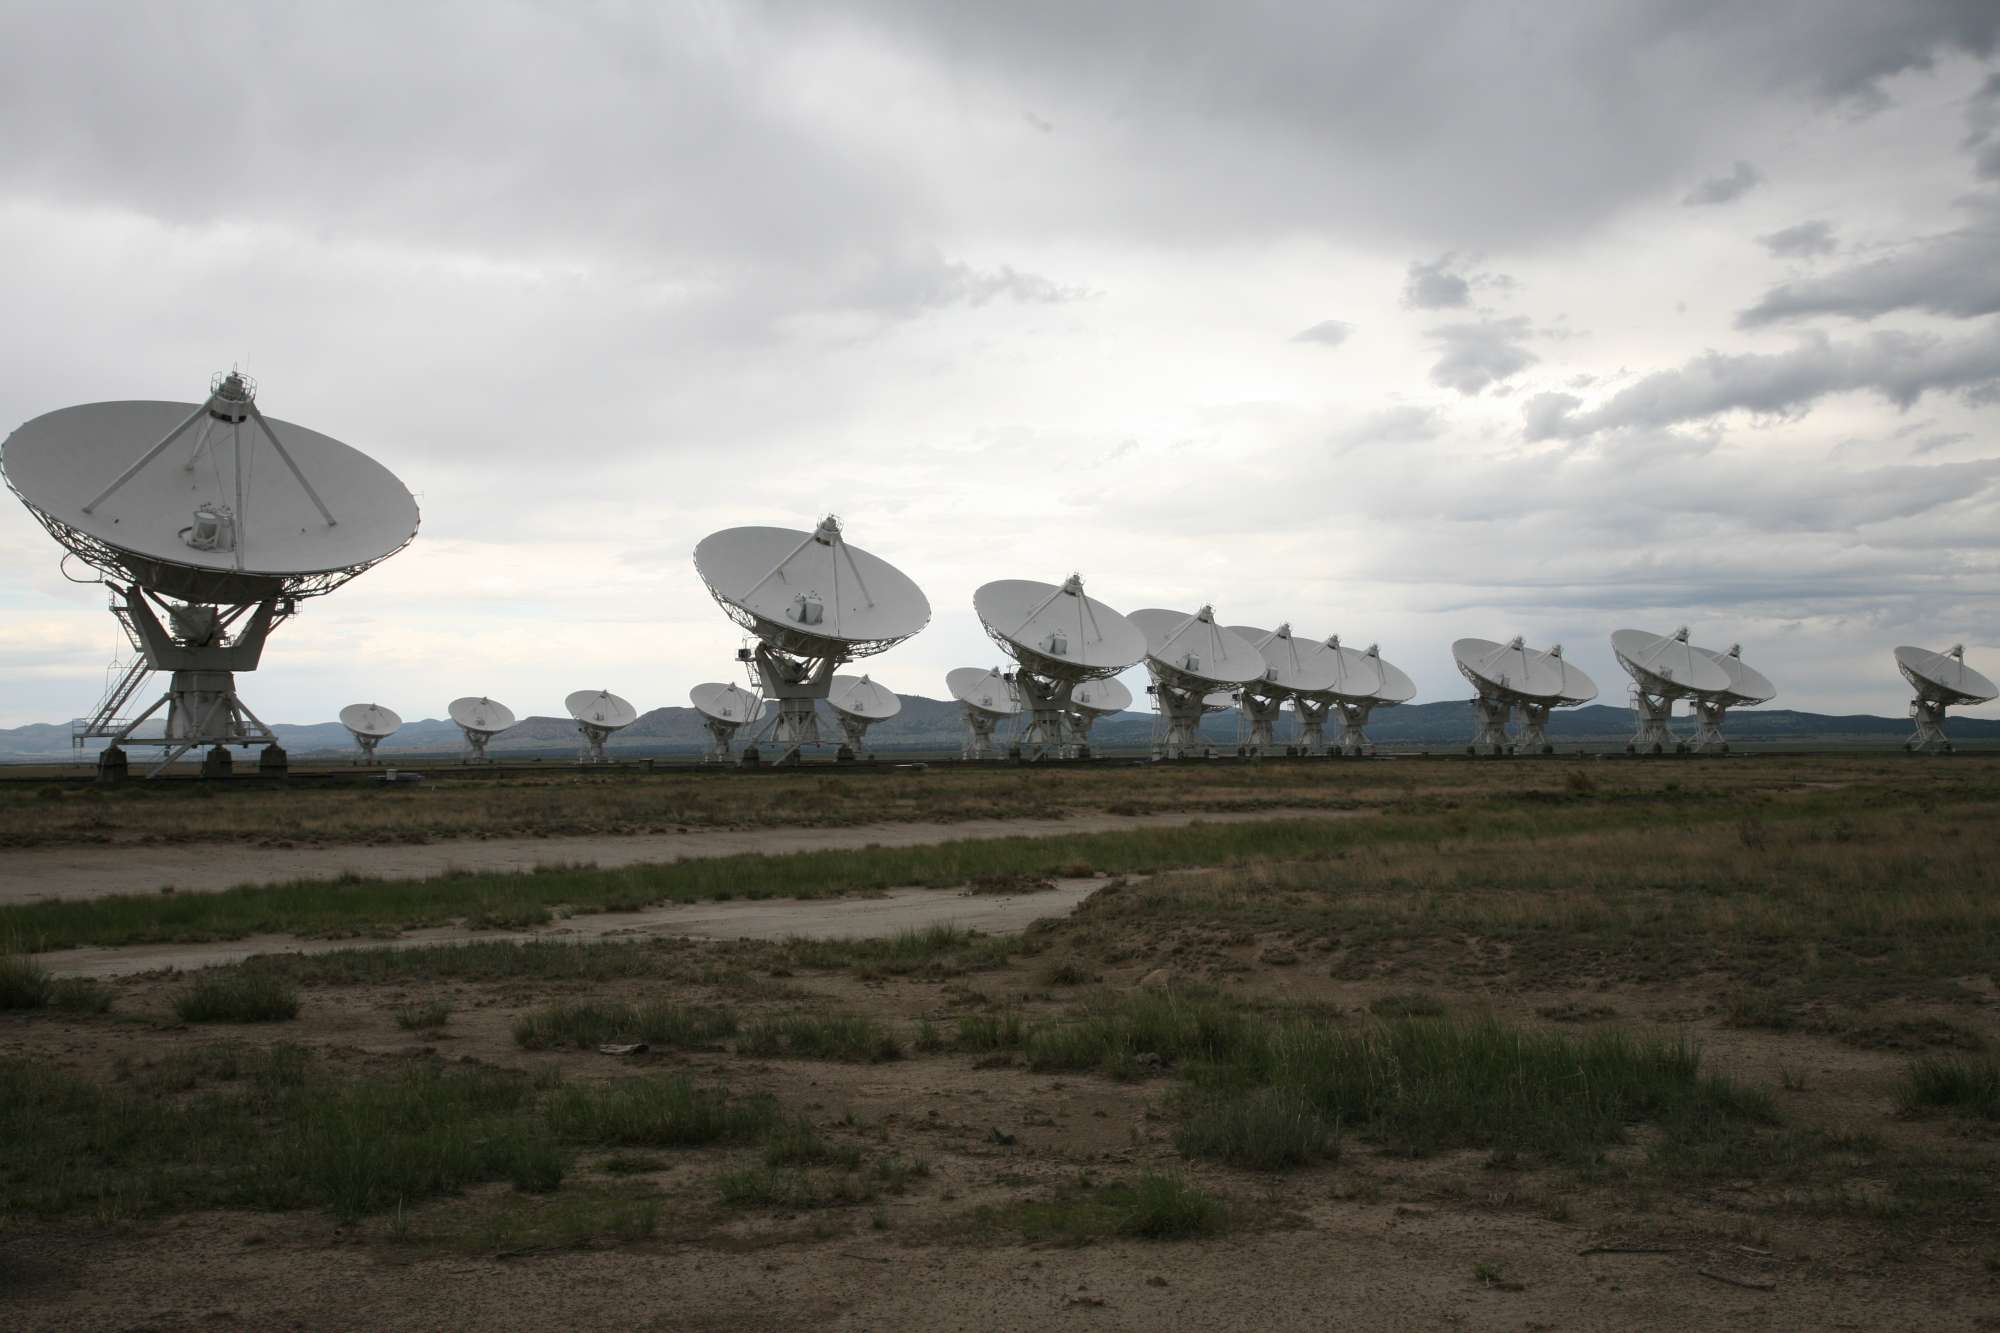 Very Large Array: 165 KB; click on the image to enlarge